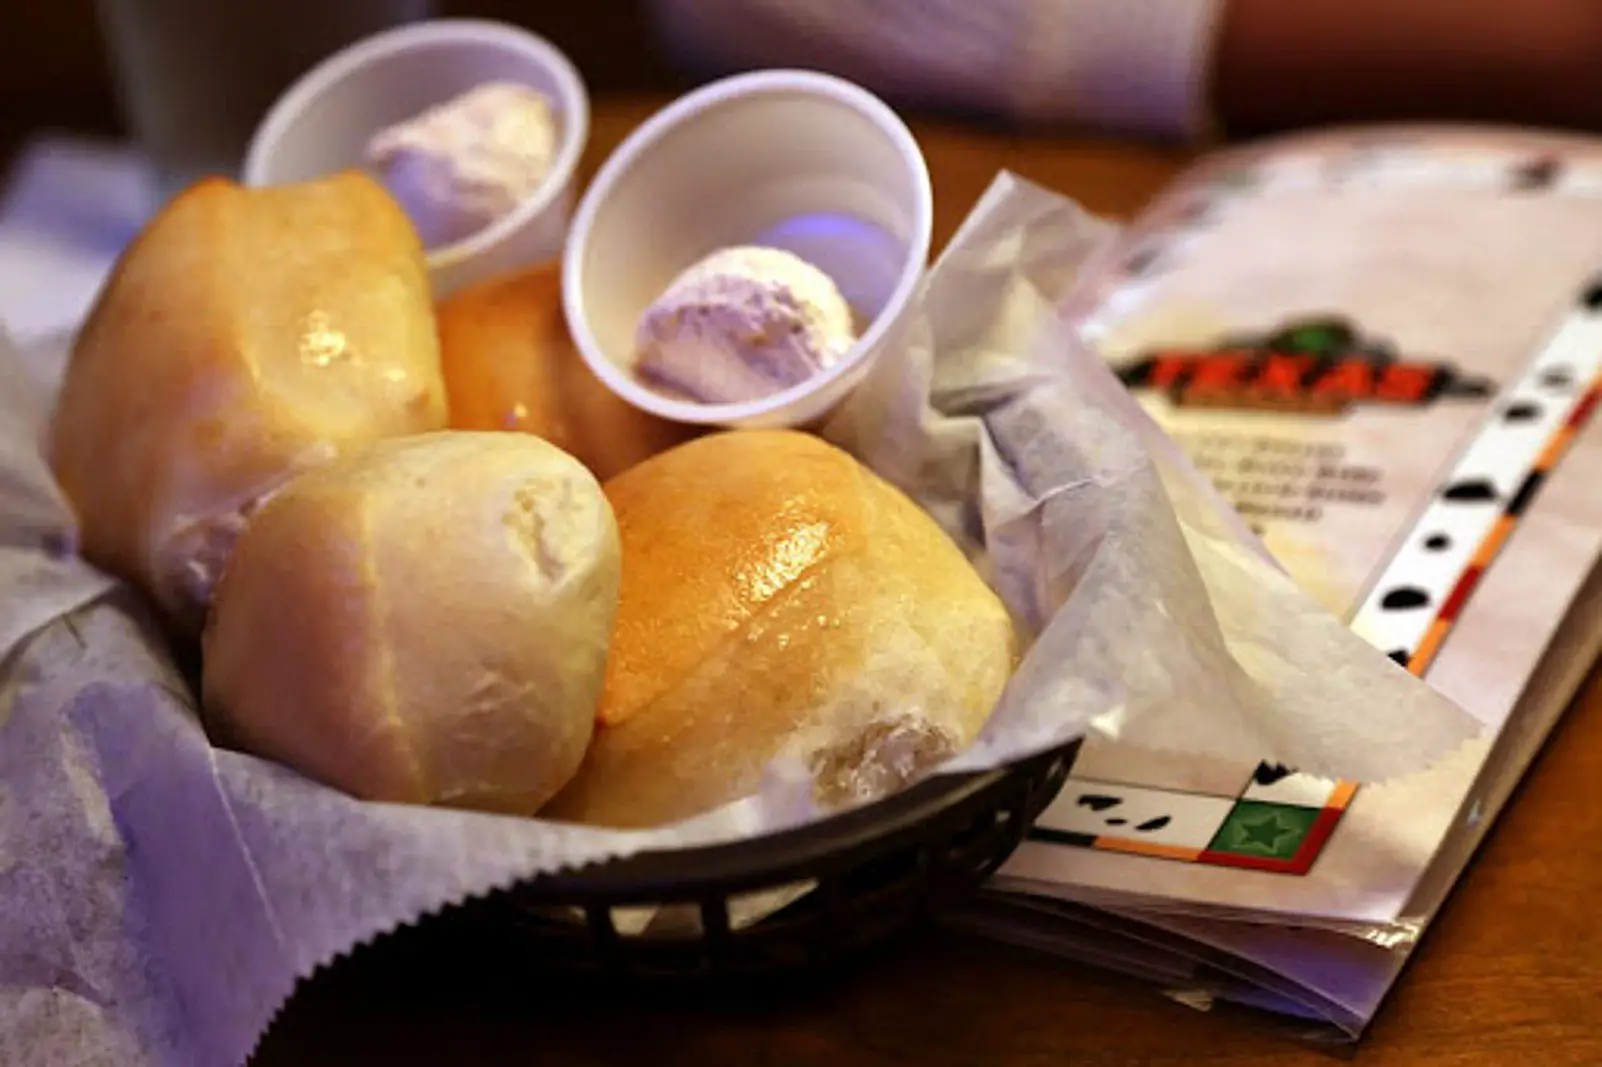 Texas Roadhouse Coupons